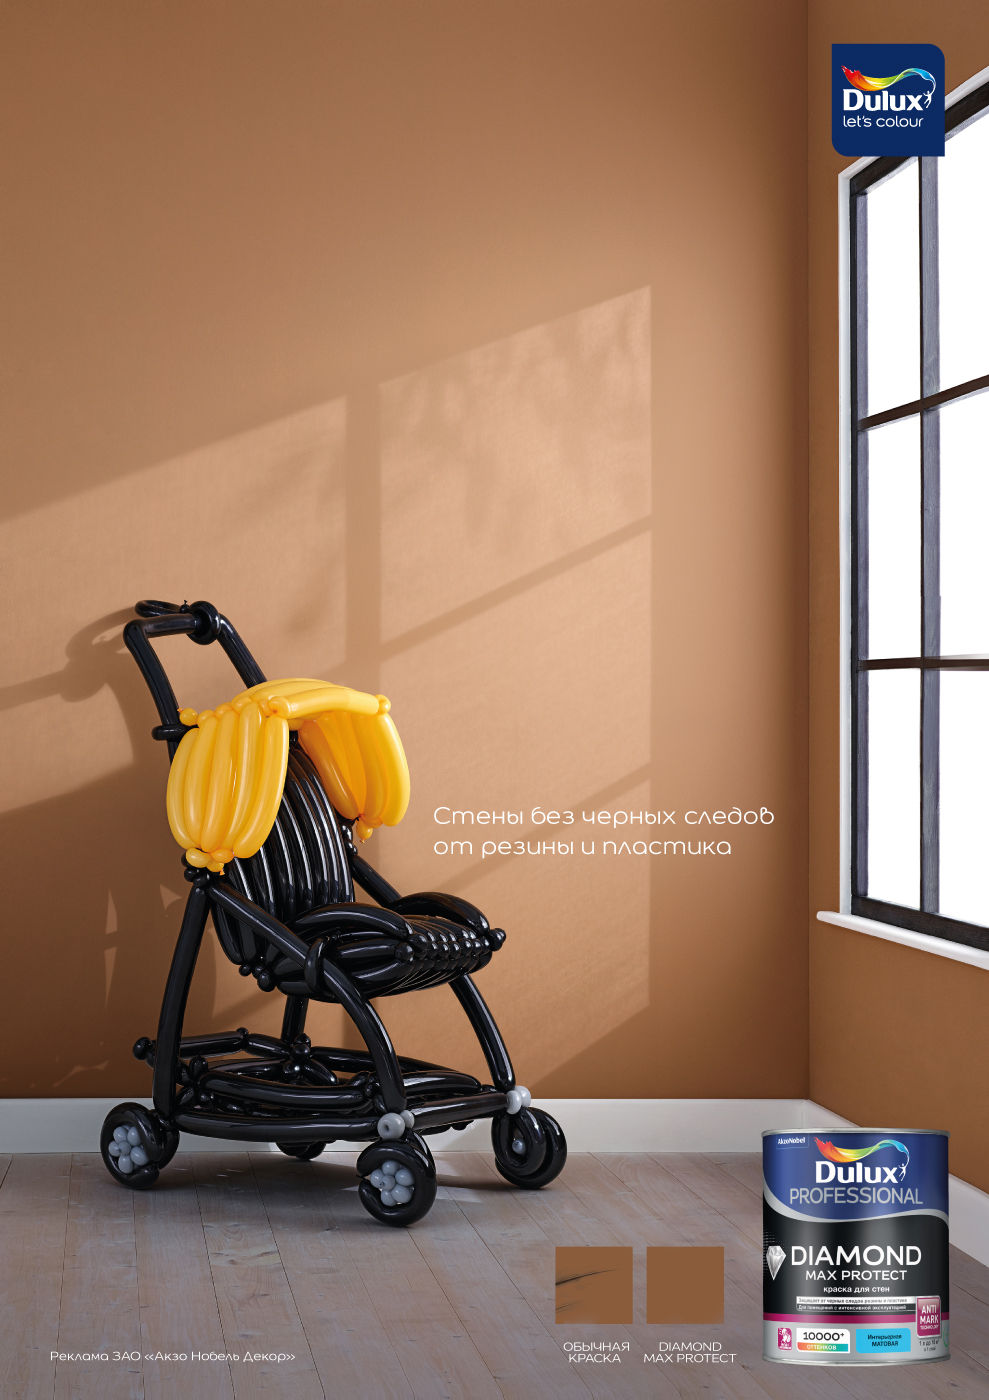 Dulux_MxPrtct_KV_Portret_A4_Buggy_Preview_2